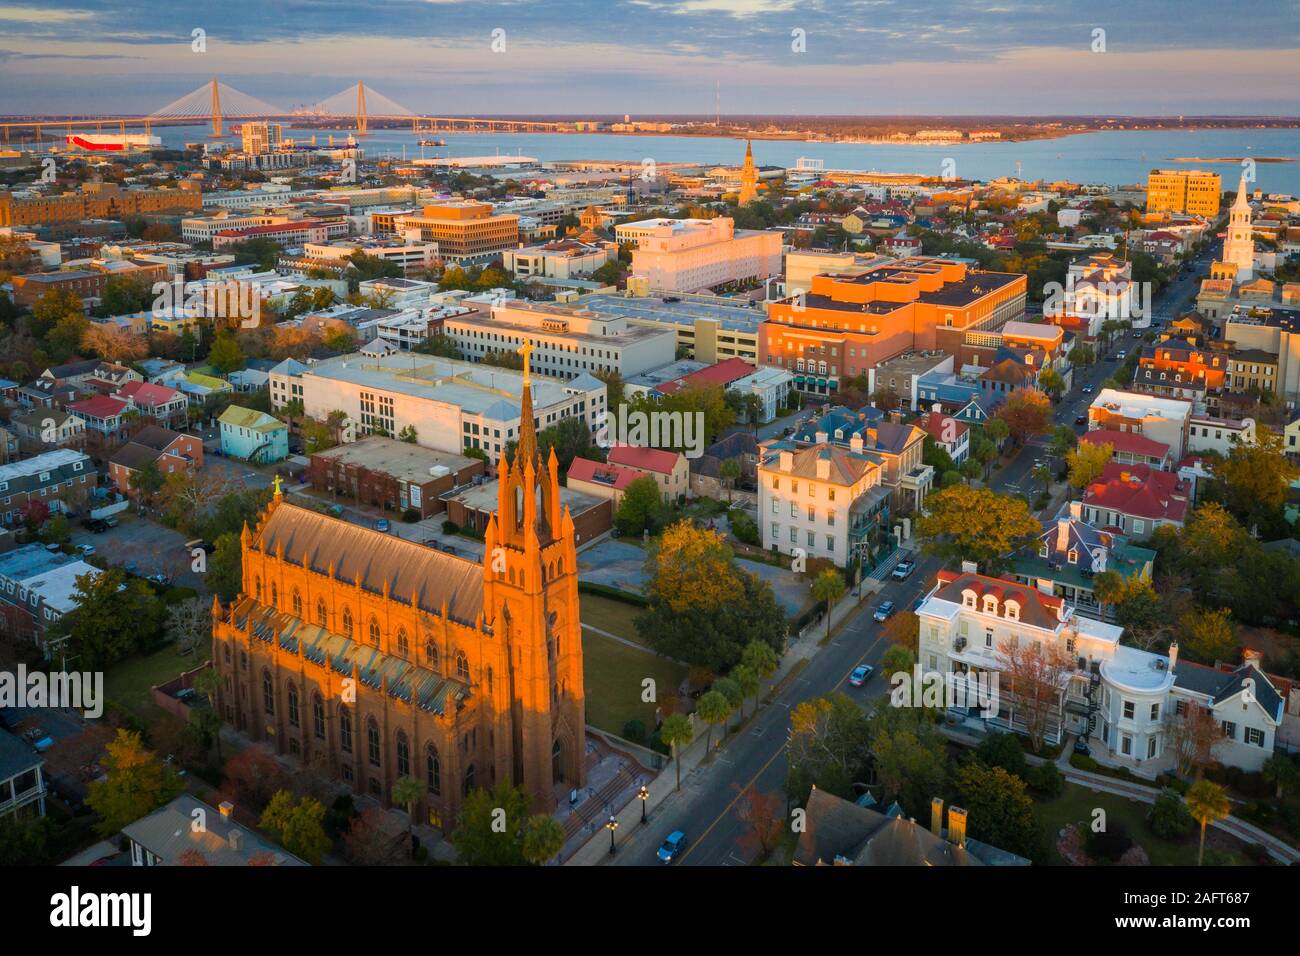 Charleston is the oldest and largest city in the U.S. state of South Carolina, known for its large role in the American slave trade. The city is the c Stock Photo